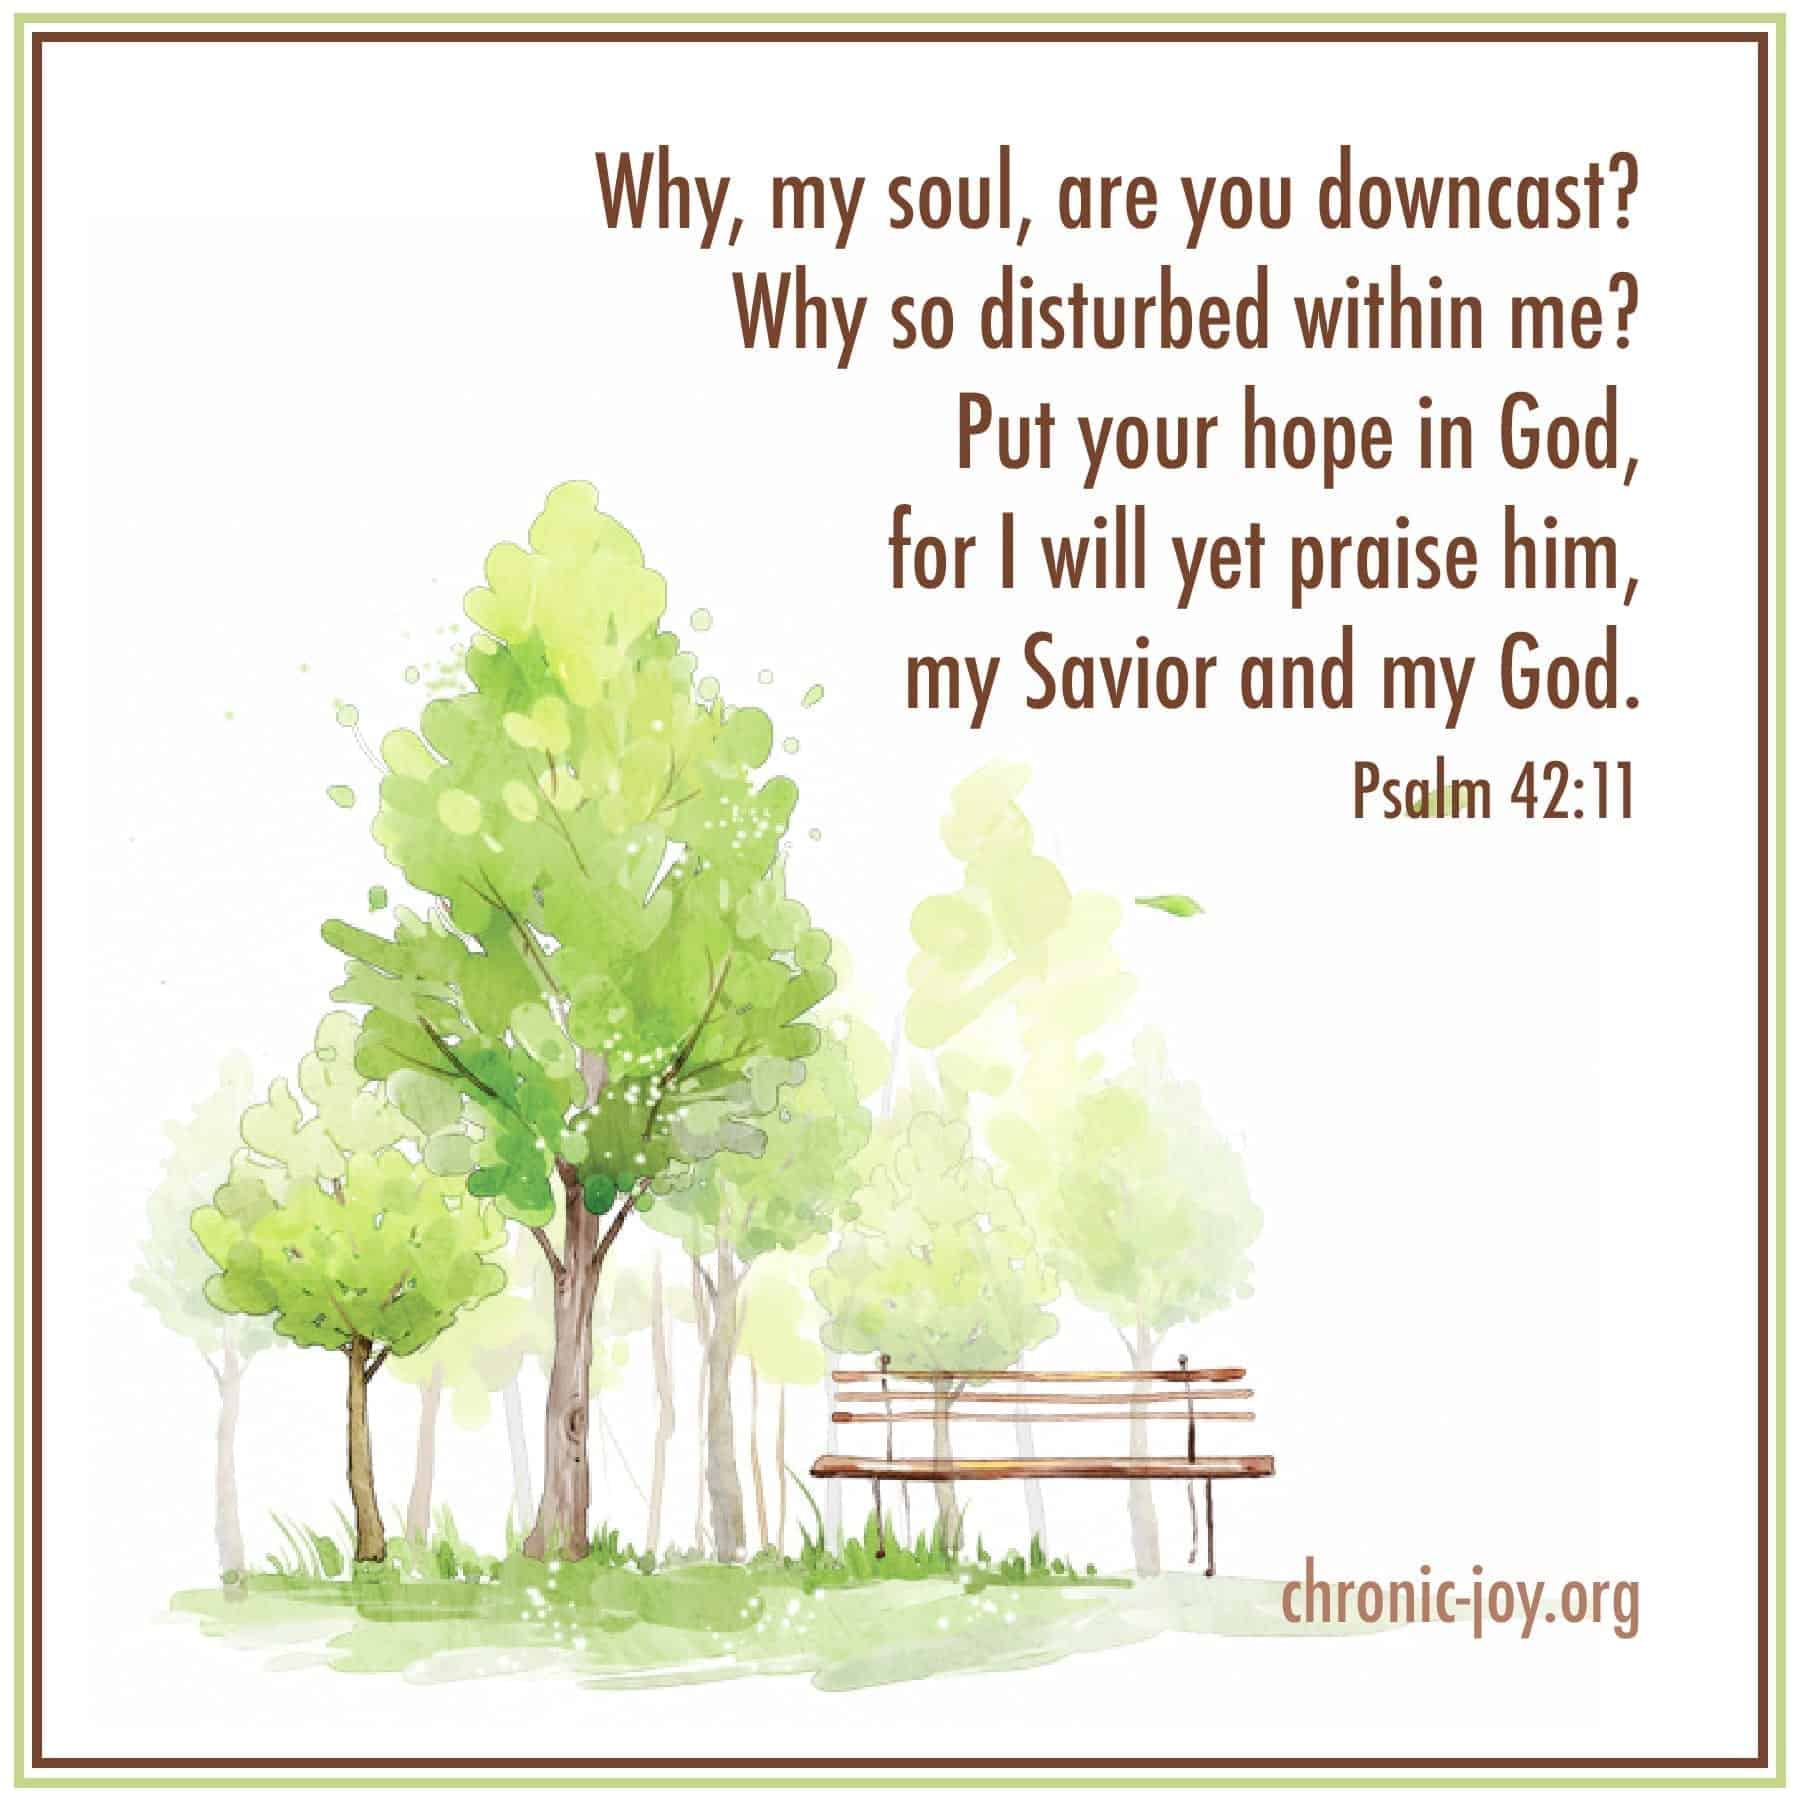 Why, my soul, are you downcast?